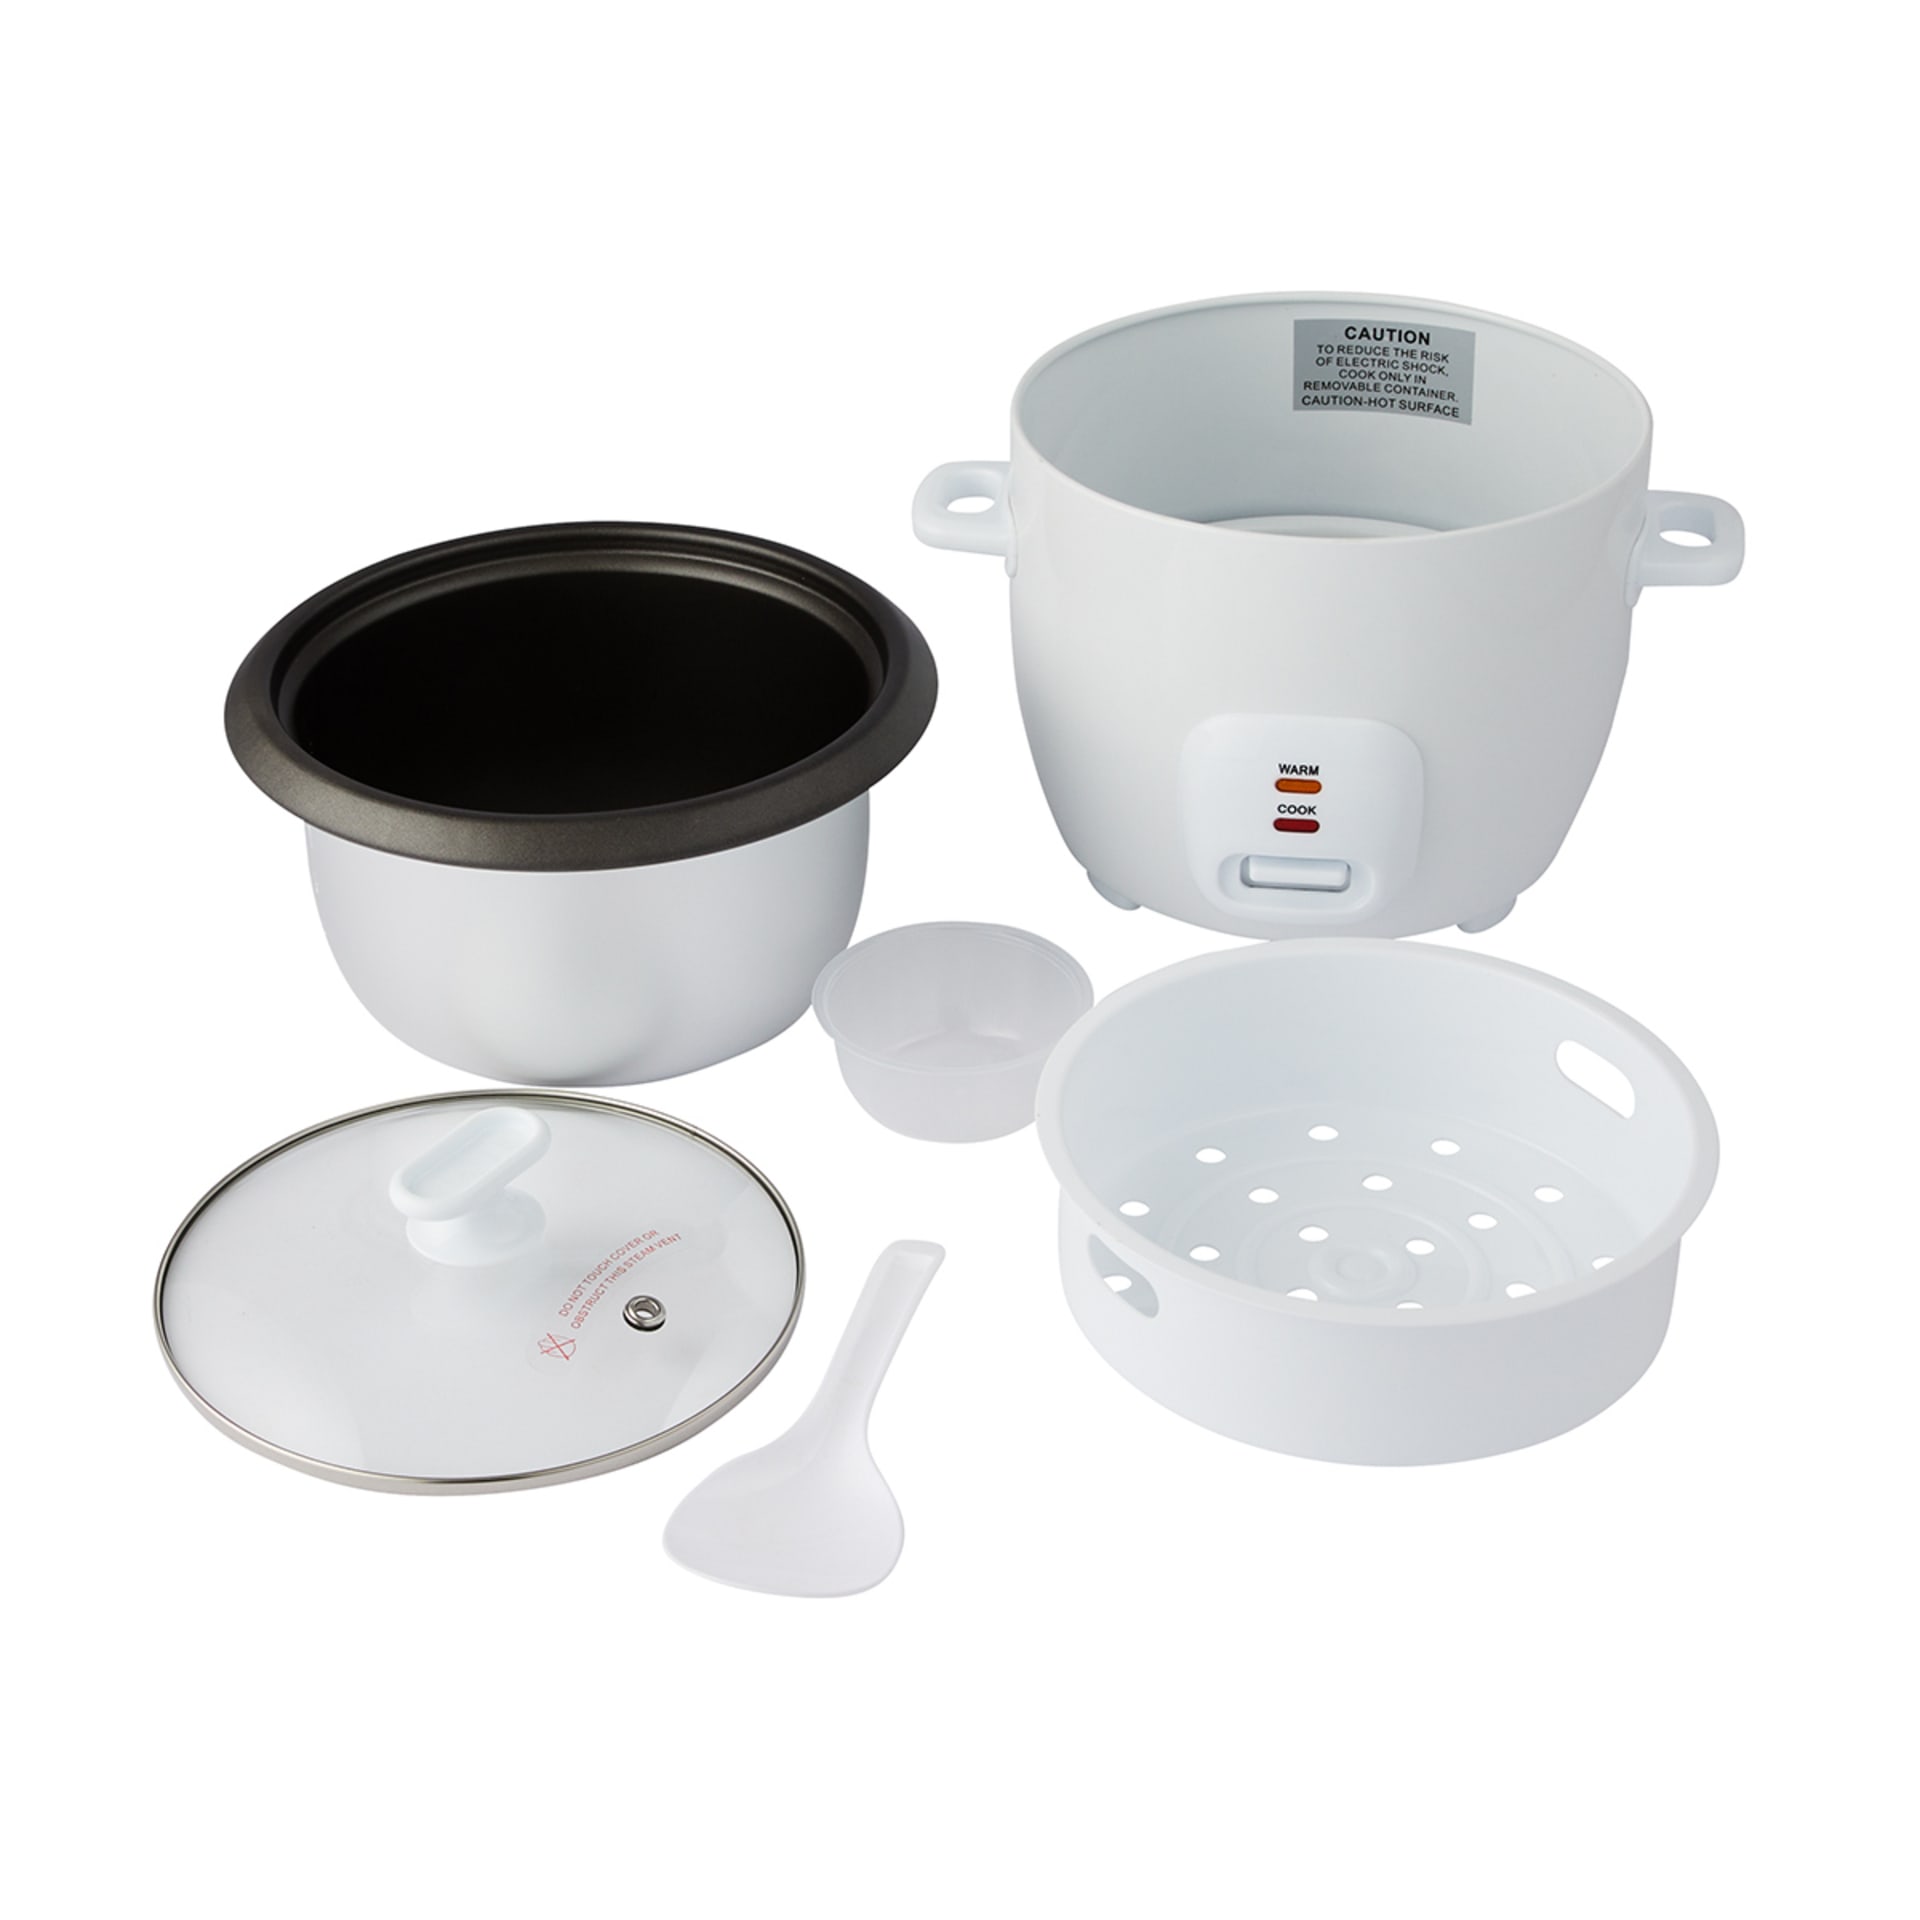 7 Cup Rice Cooker - Kmart